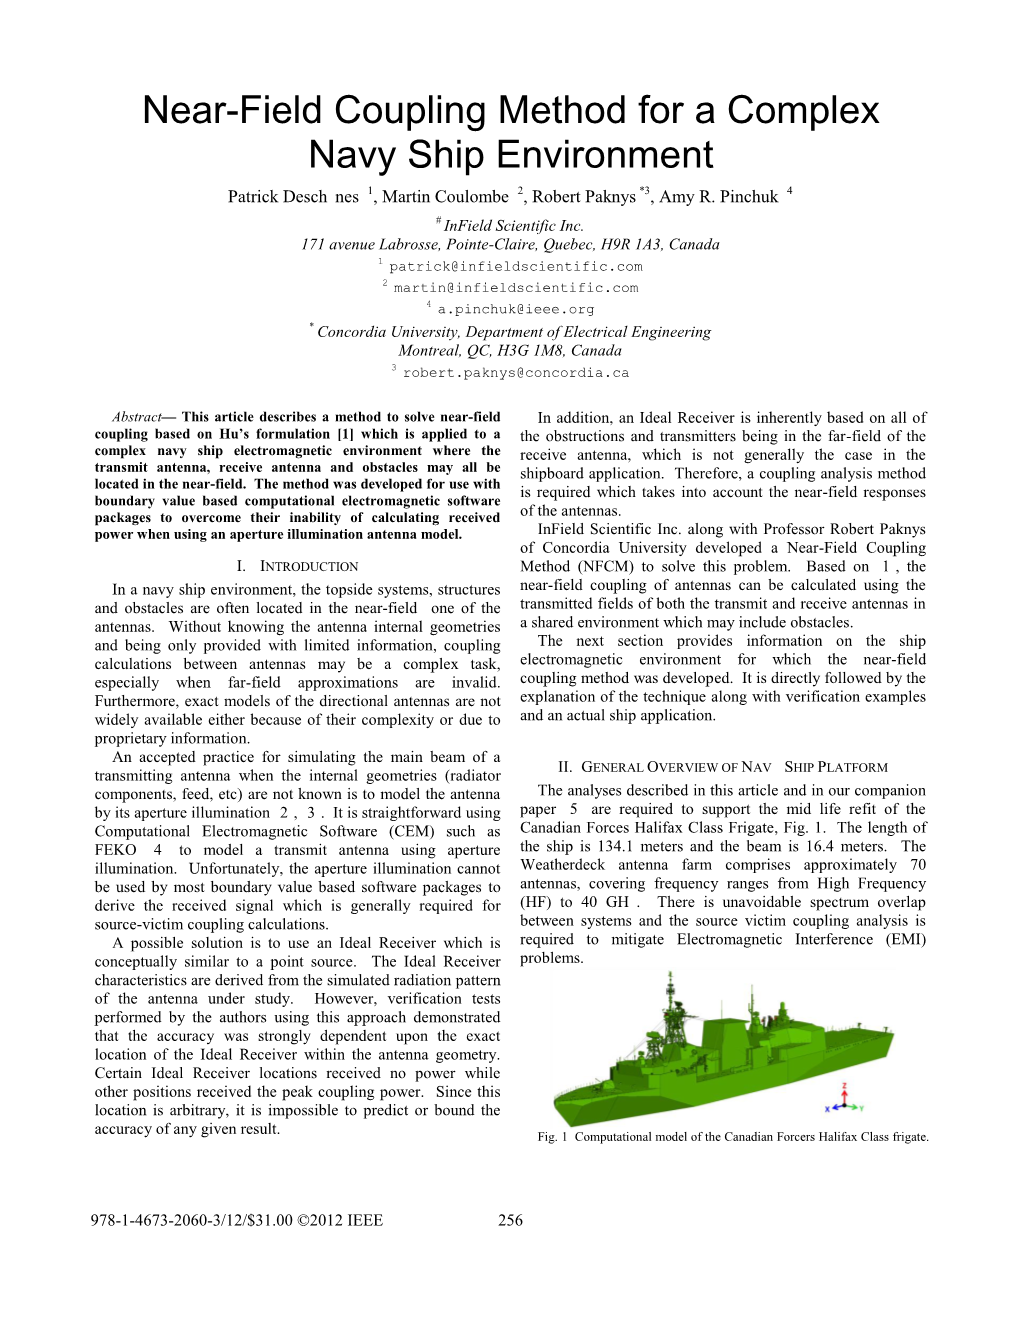 Near-Field Coupling Method for a Complex Navy Ship Environment Patrick Deschênes #1, Martin Coulombe #2, Robert Paknys *3, Amy R